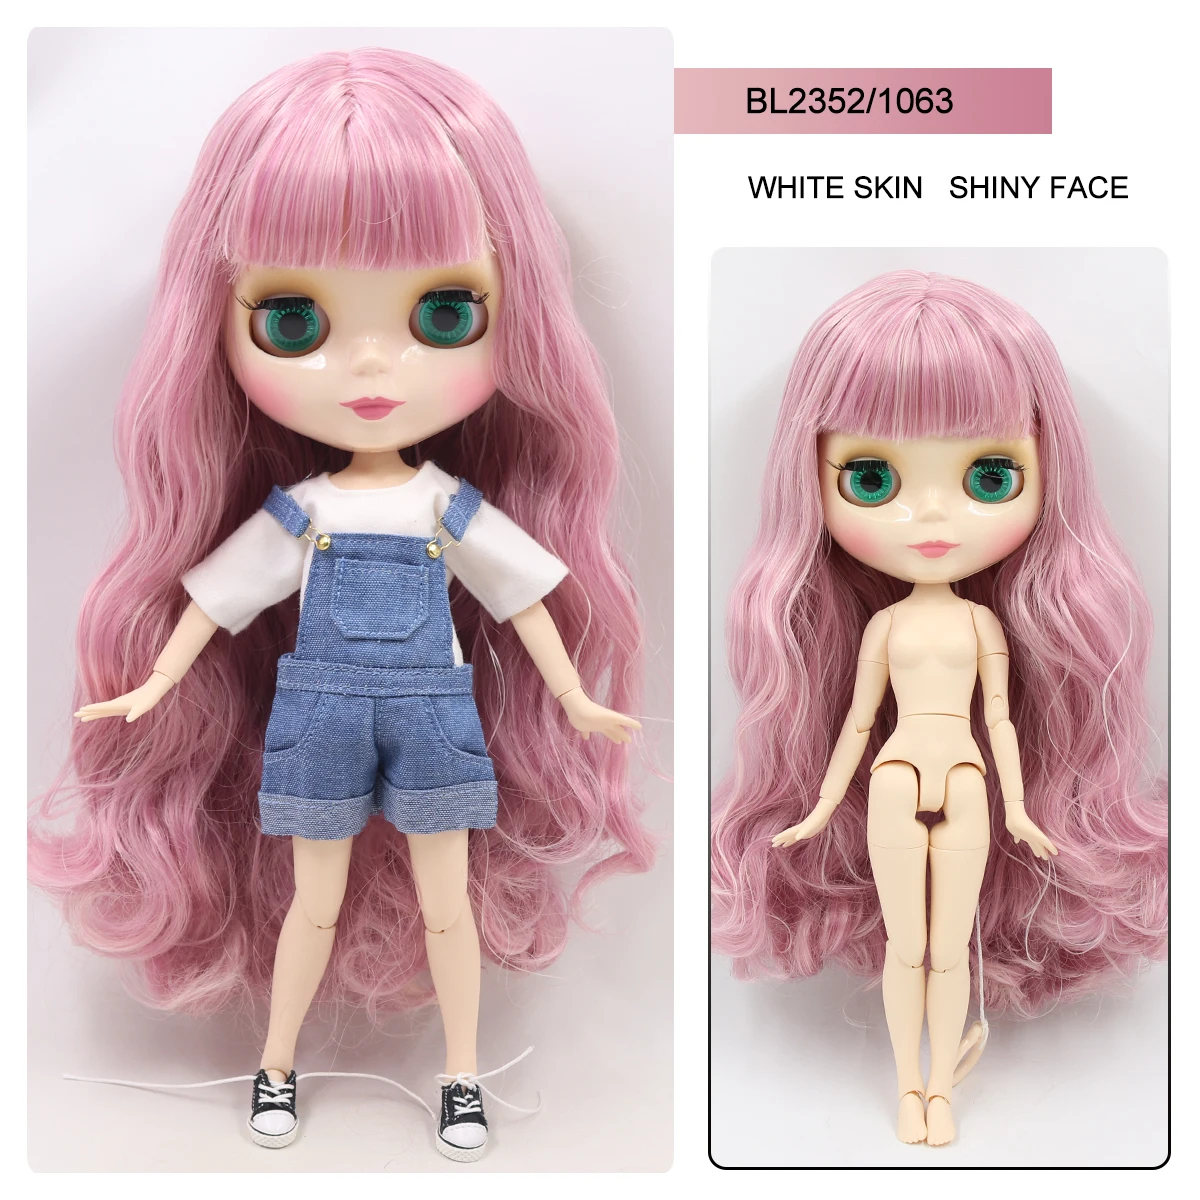 Factory Blythe Doll, Top 22 Jointed Body Options with Free Gifts 19